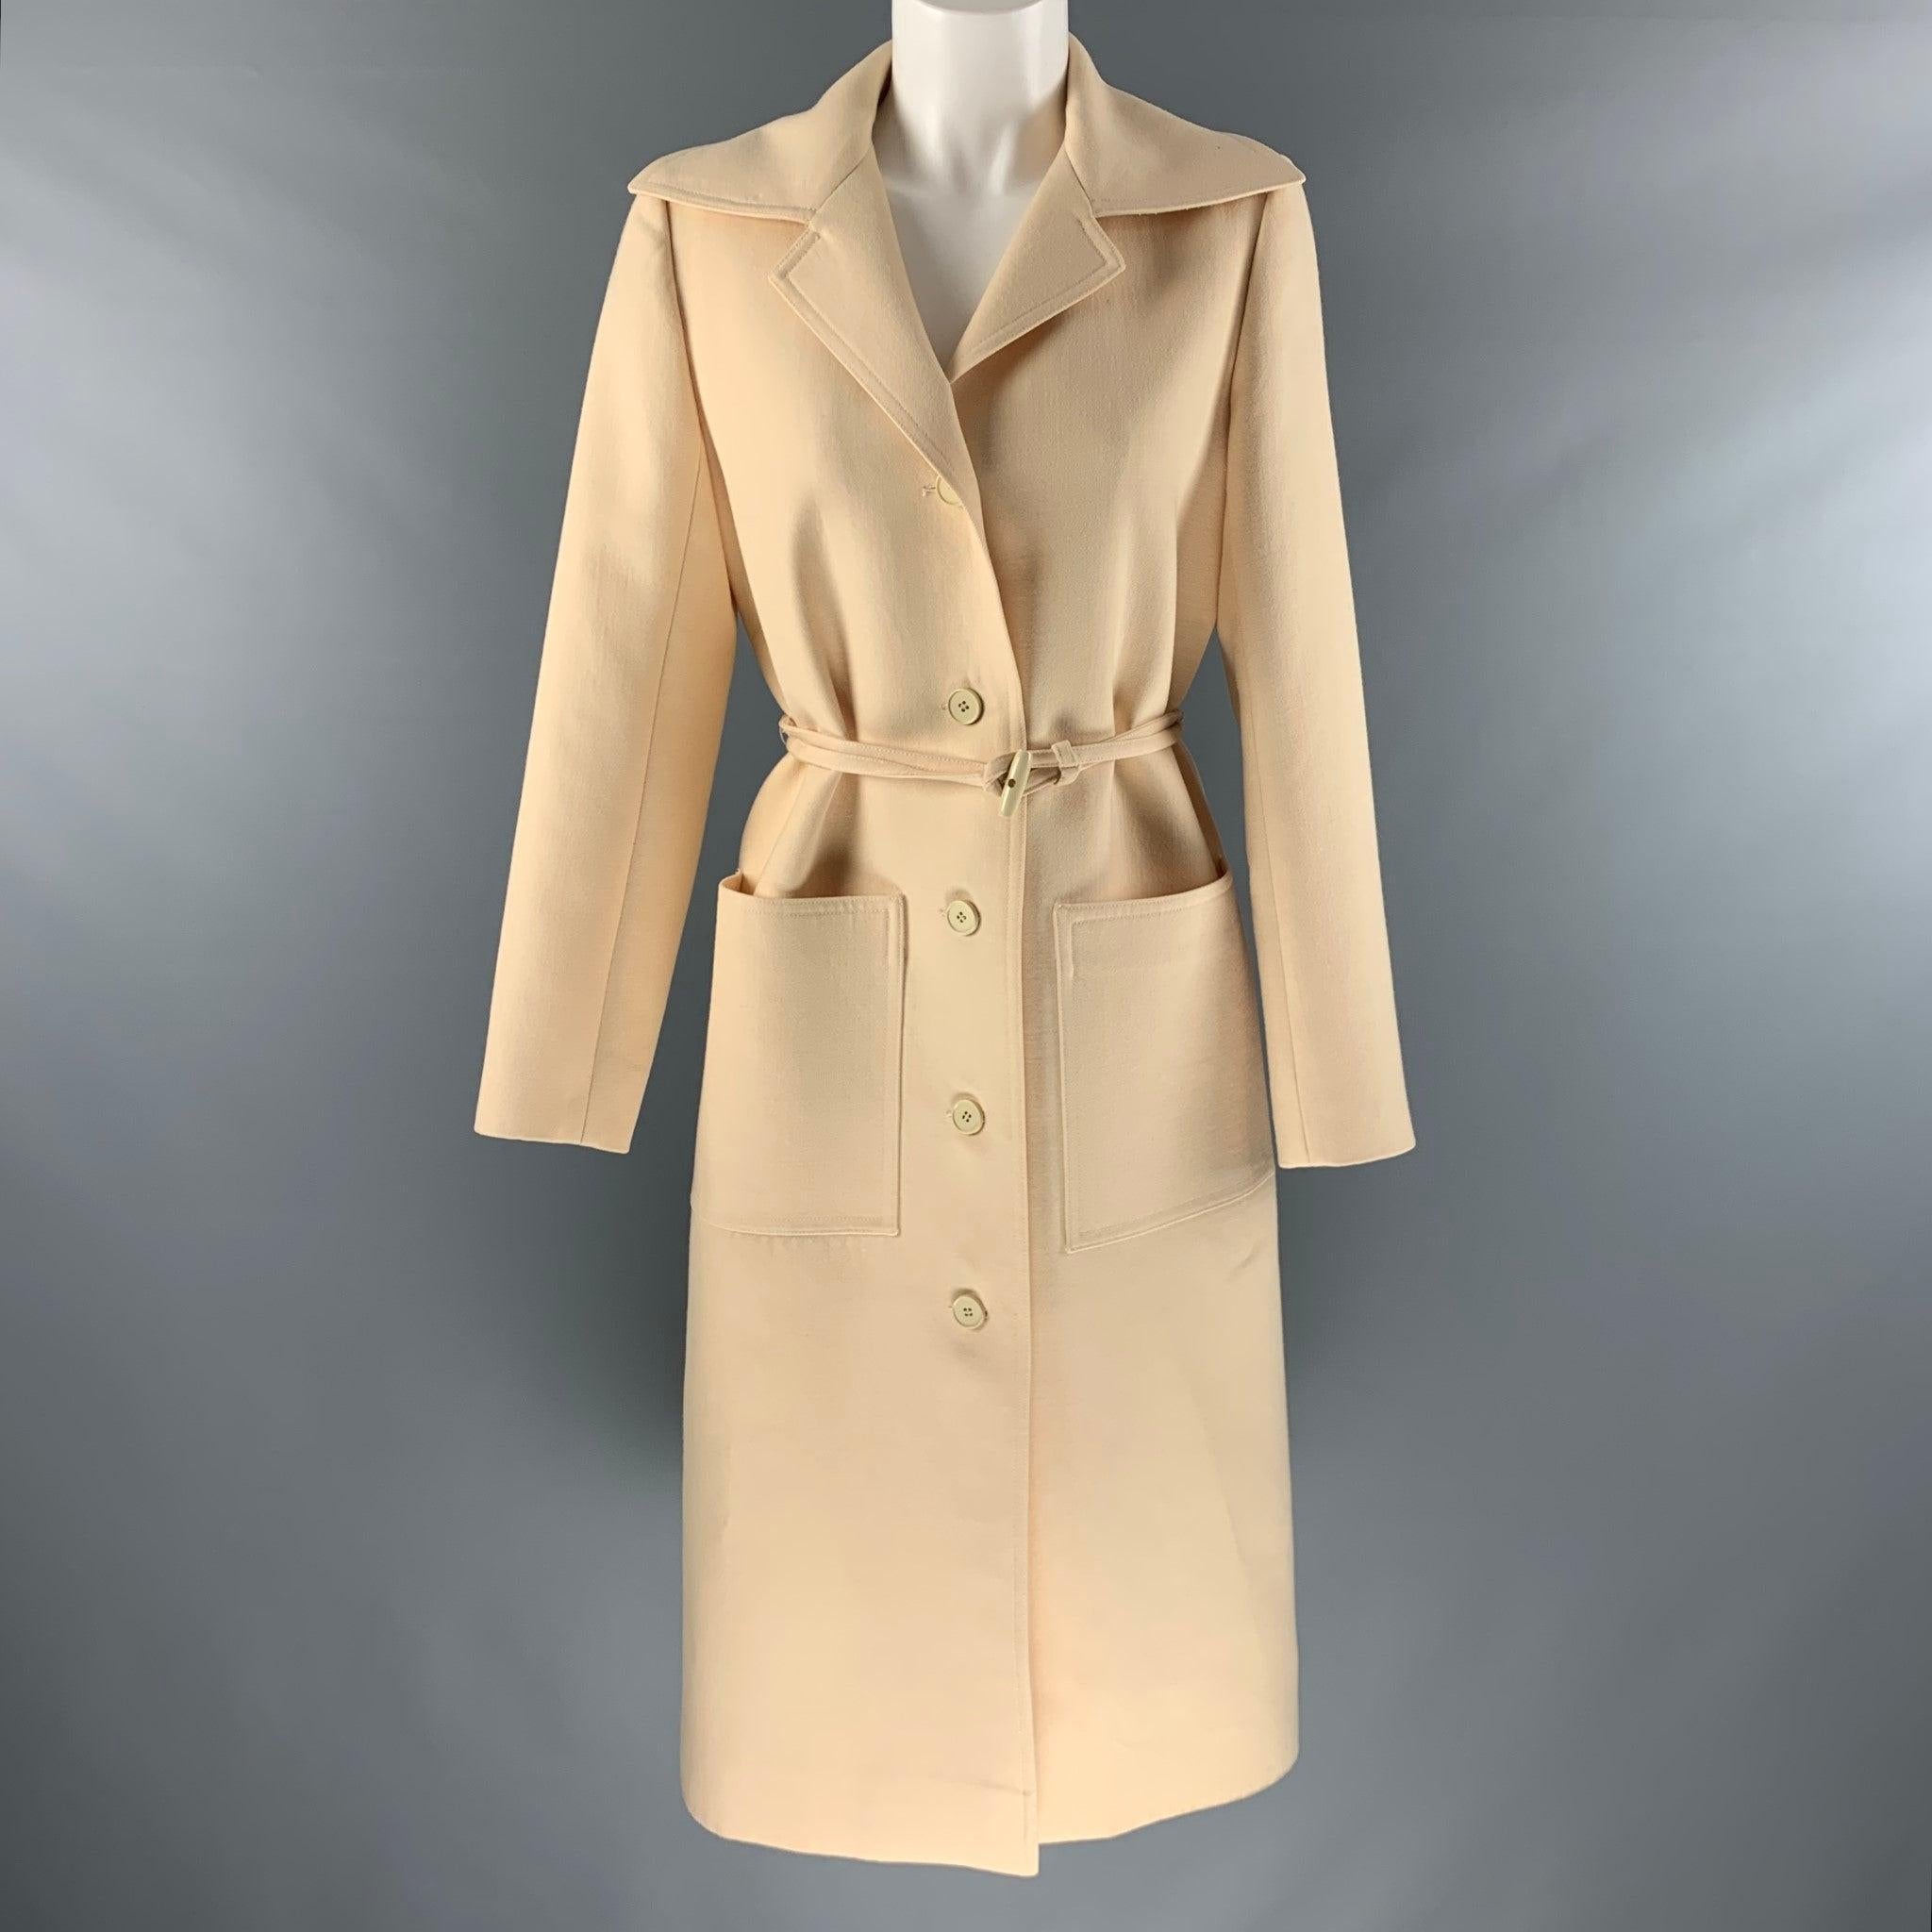 GIVENCHY Nouvelle Boutique by HUBERT vintage coat comes in a cream twill featuring a notch lapel, patch pockets, belted, and a four button closure. Made in France.Excellent Pre-Owned Condition. 

Marked:  no size market. 

Measurements: 
 
Shoulder: